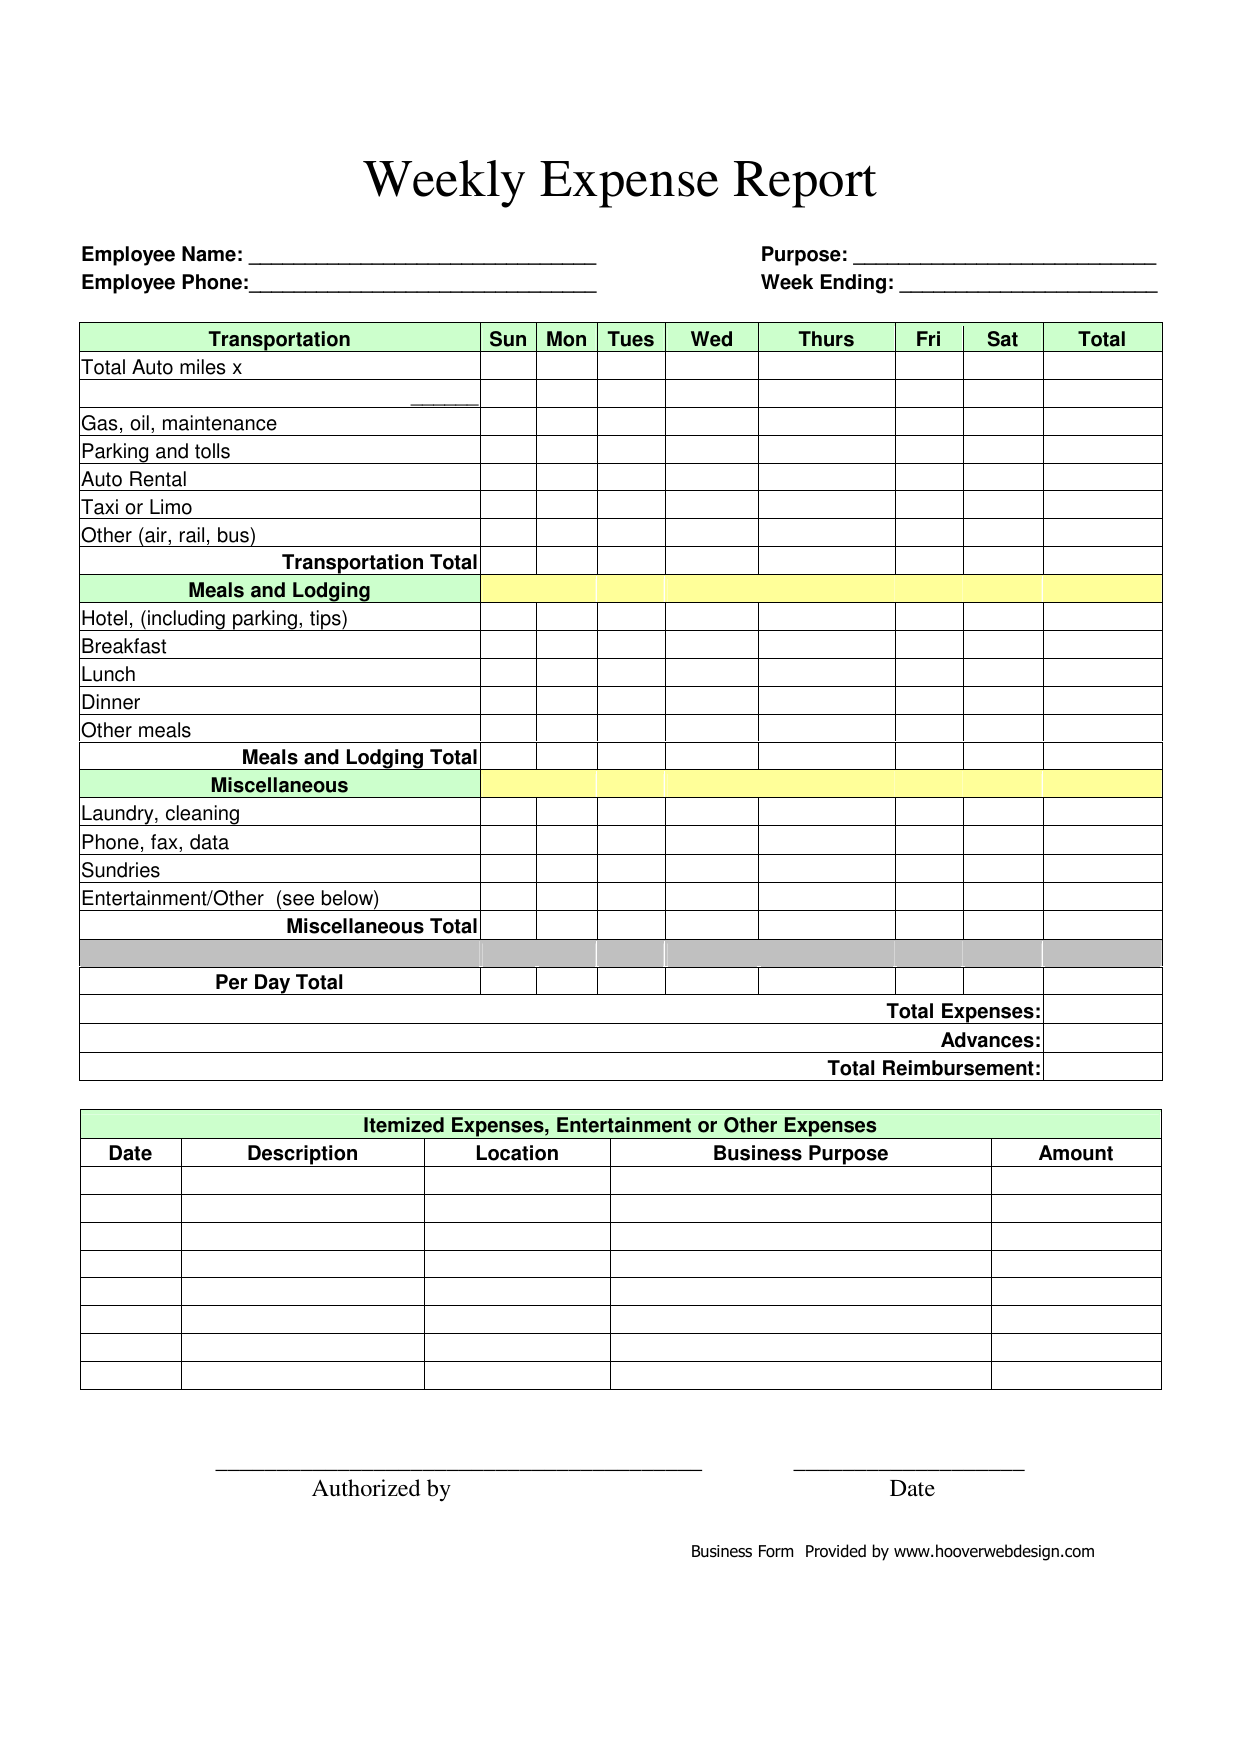 business expenses report template